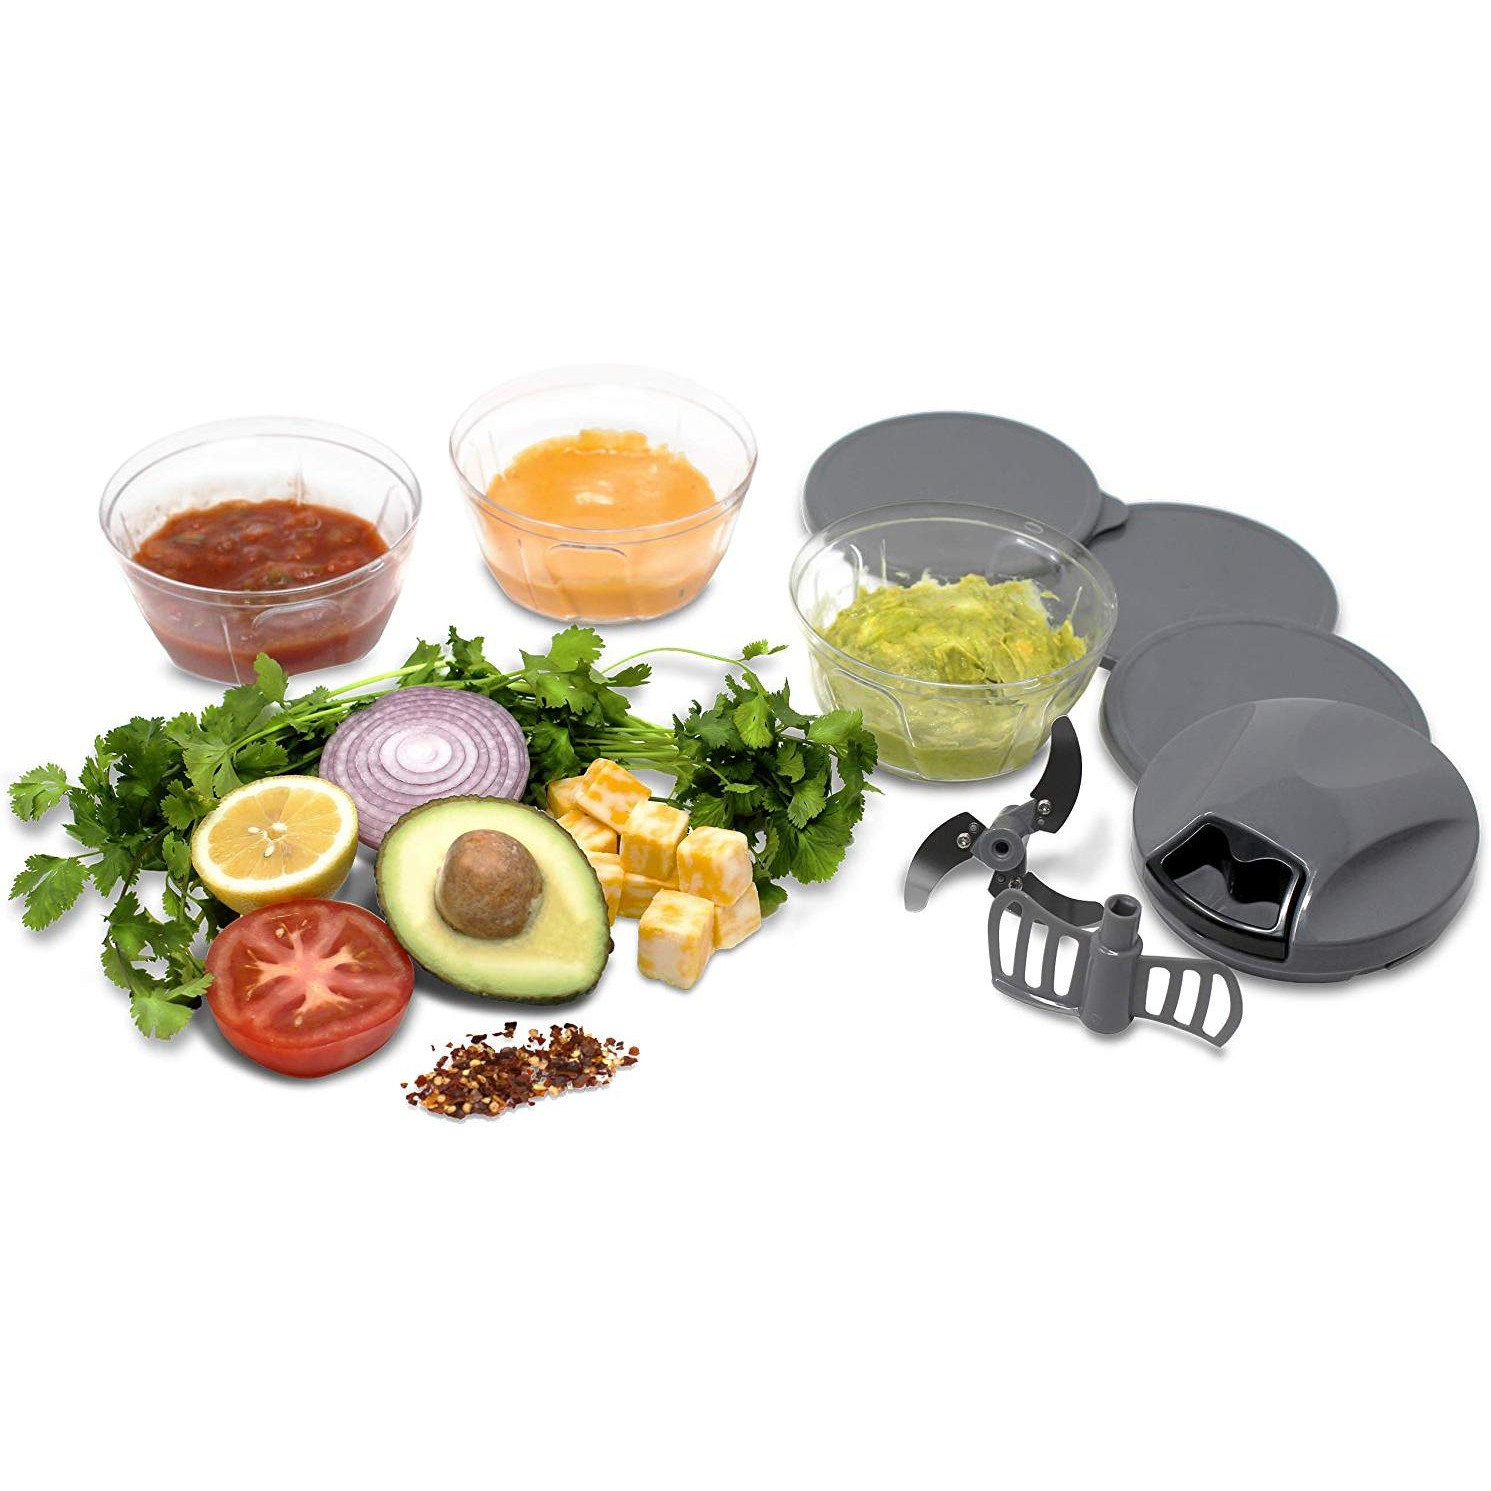 Buy Online Tribowl Apache, Hand Powered Manual Pull Cord Food